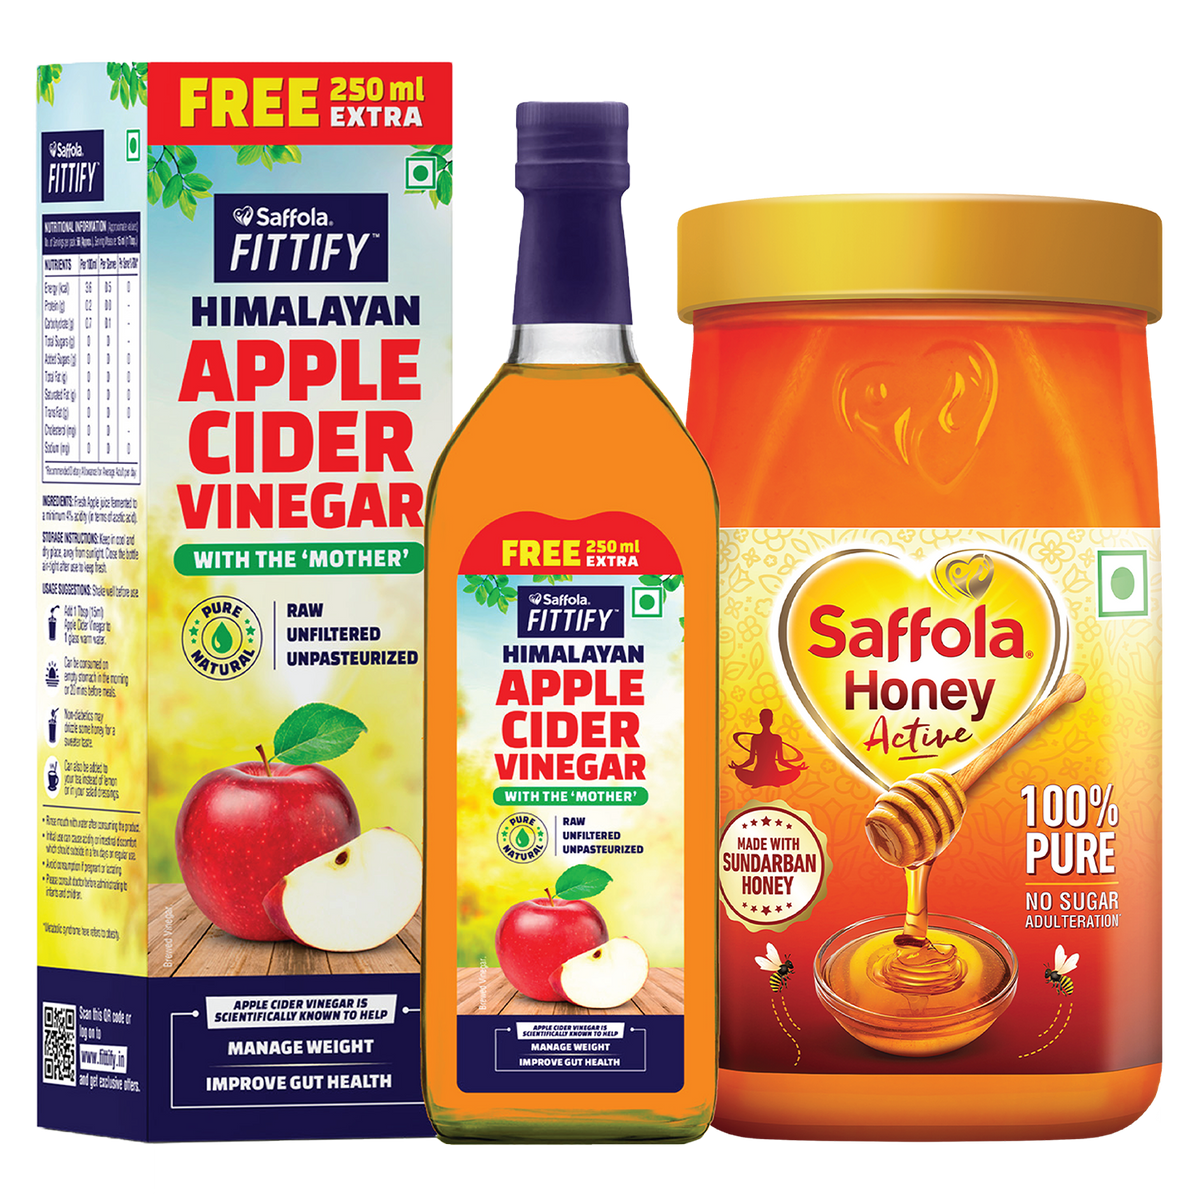 Wellness Combo (Saffola Fittify Apple Cider Vinegar with the Mother – 1000ml + Saffola Honey Active Pet Jar 1kg)